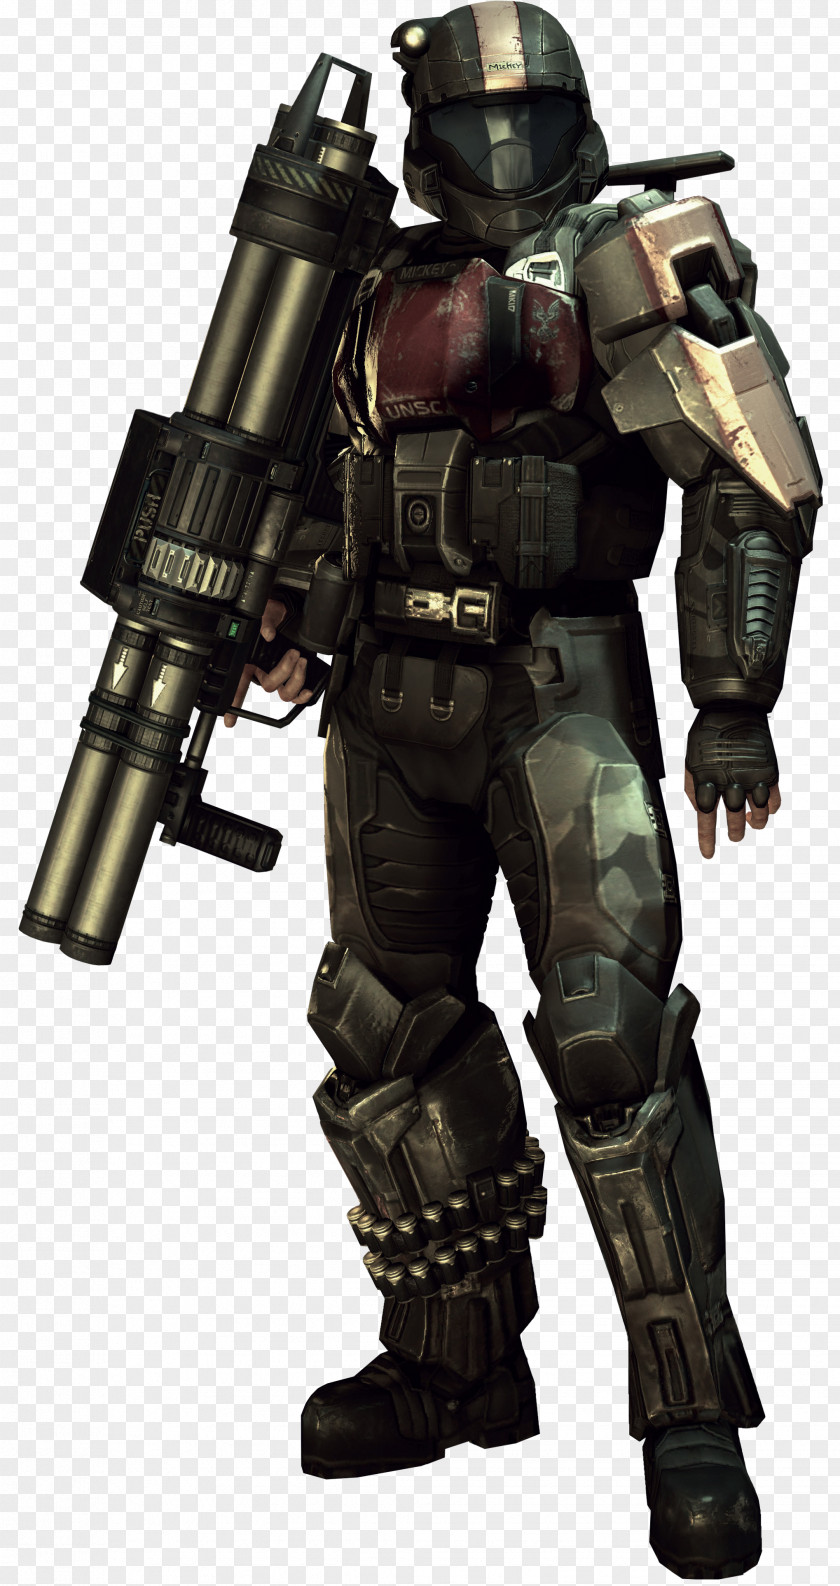 Halo 3: ODST Halo: Reach Master Chief 4 PNG